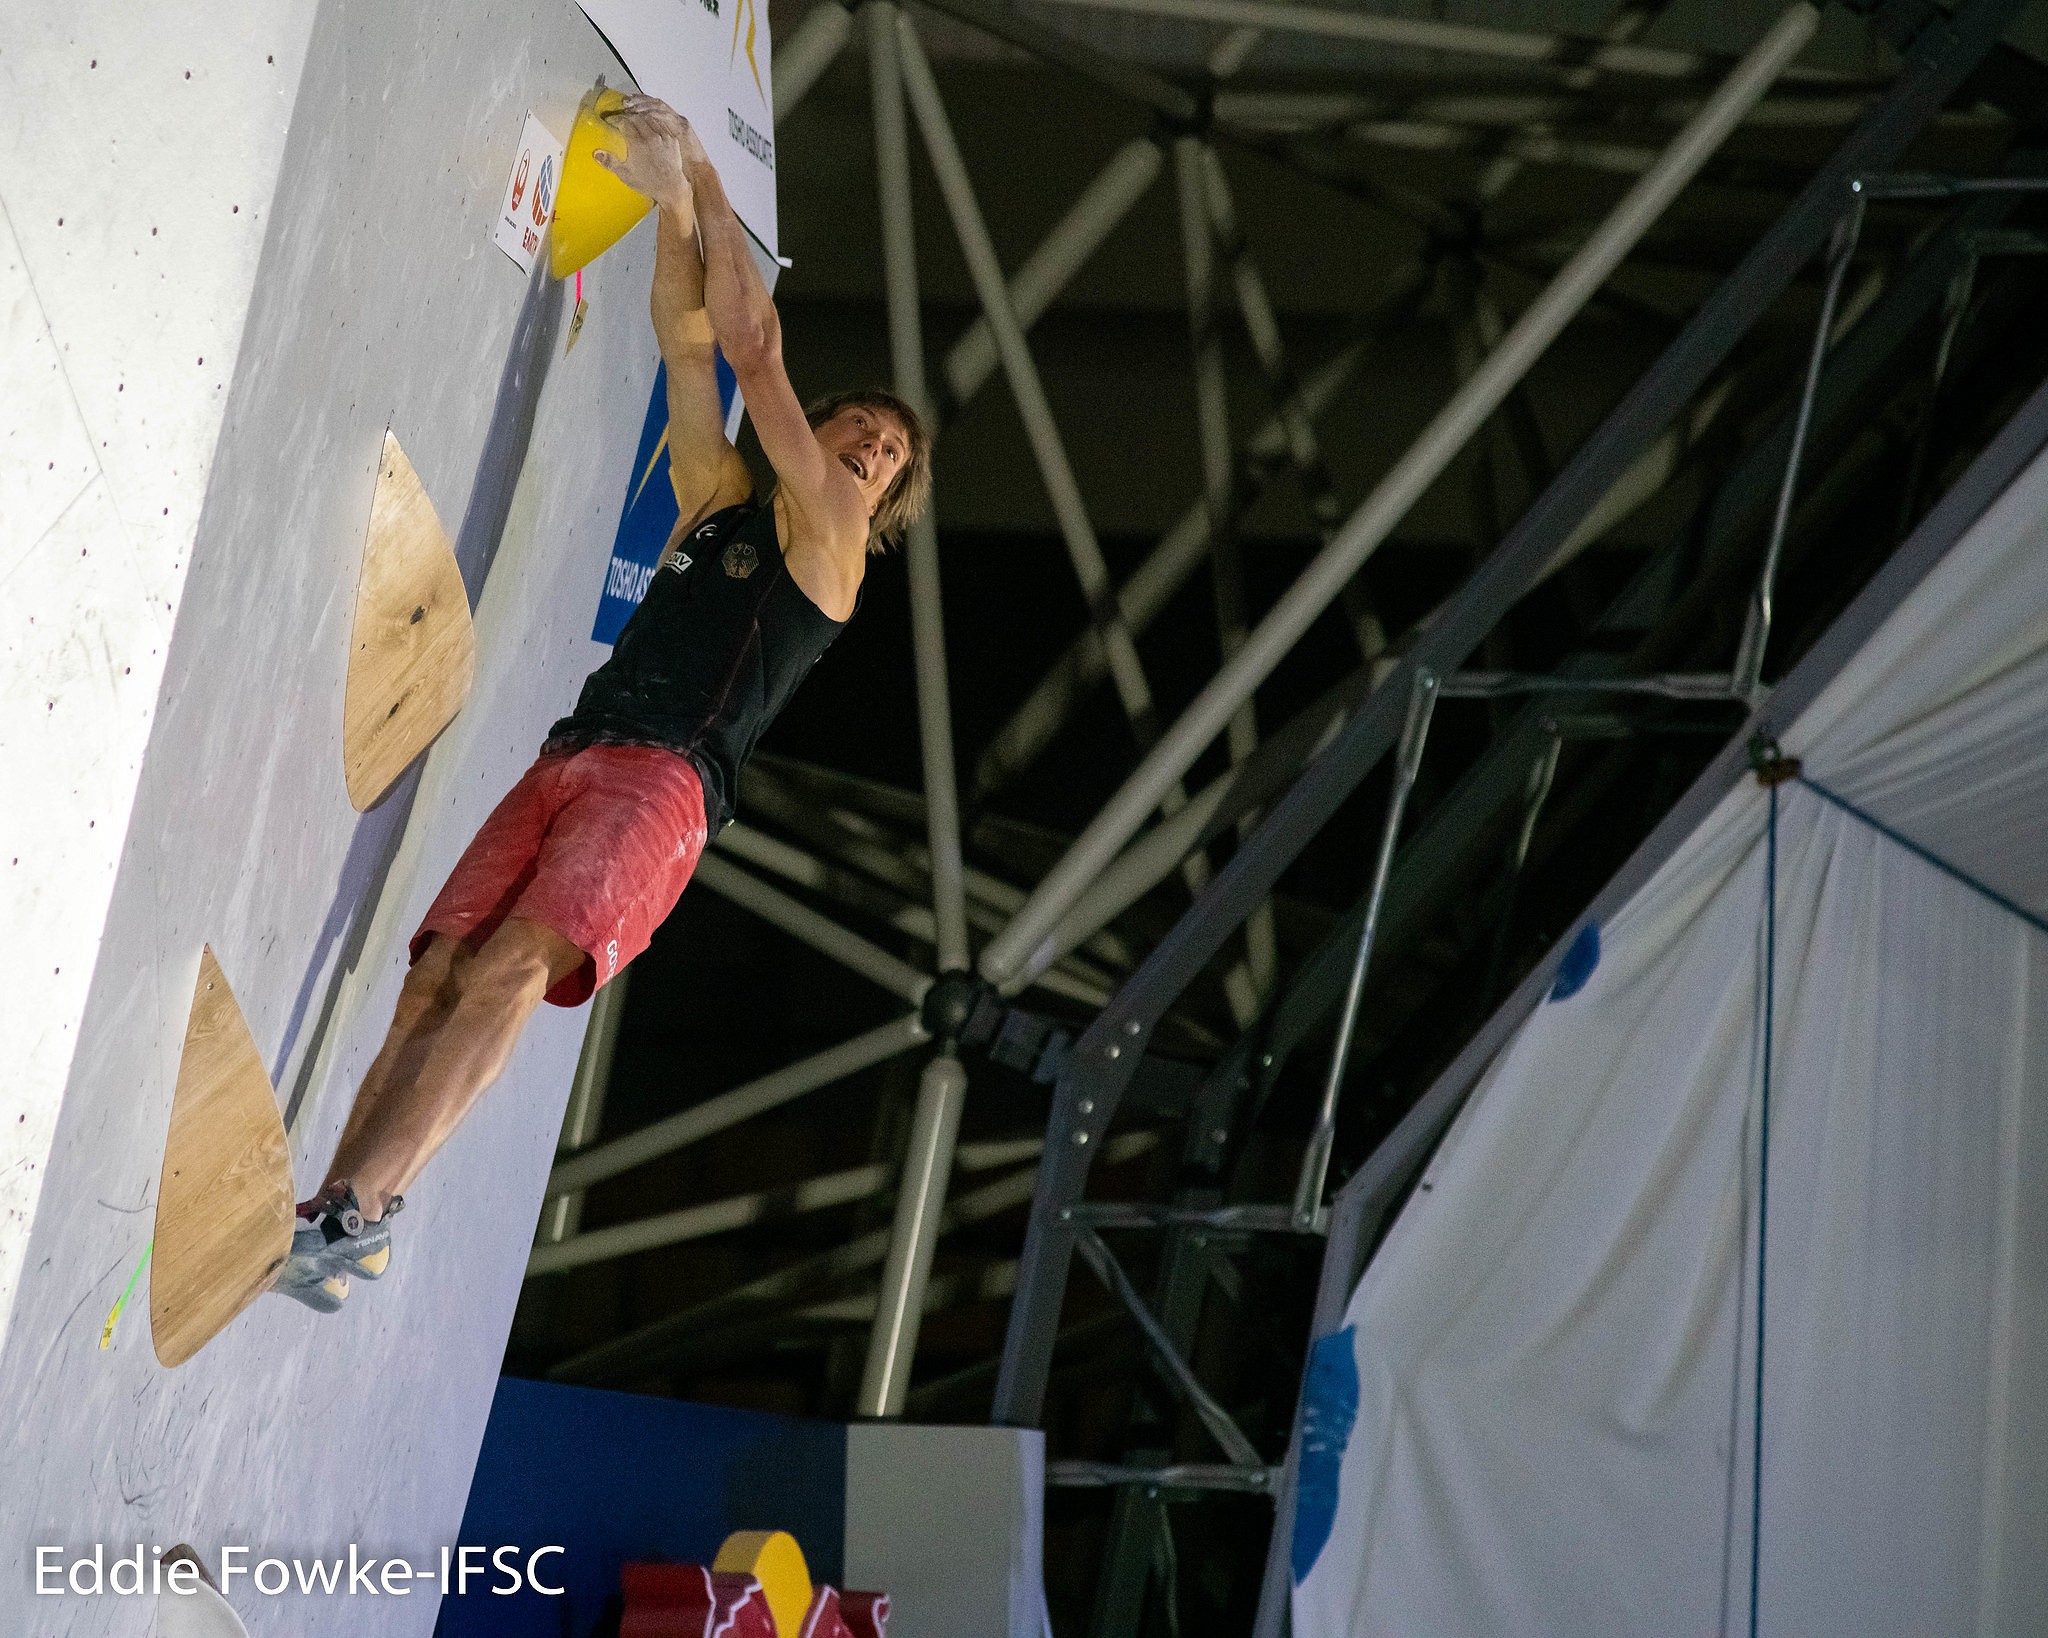 Alex Megos stormed through Combined qualification, before injuring a finger in the final.  © Eddie Fowke/IFSC